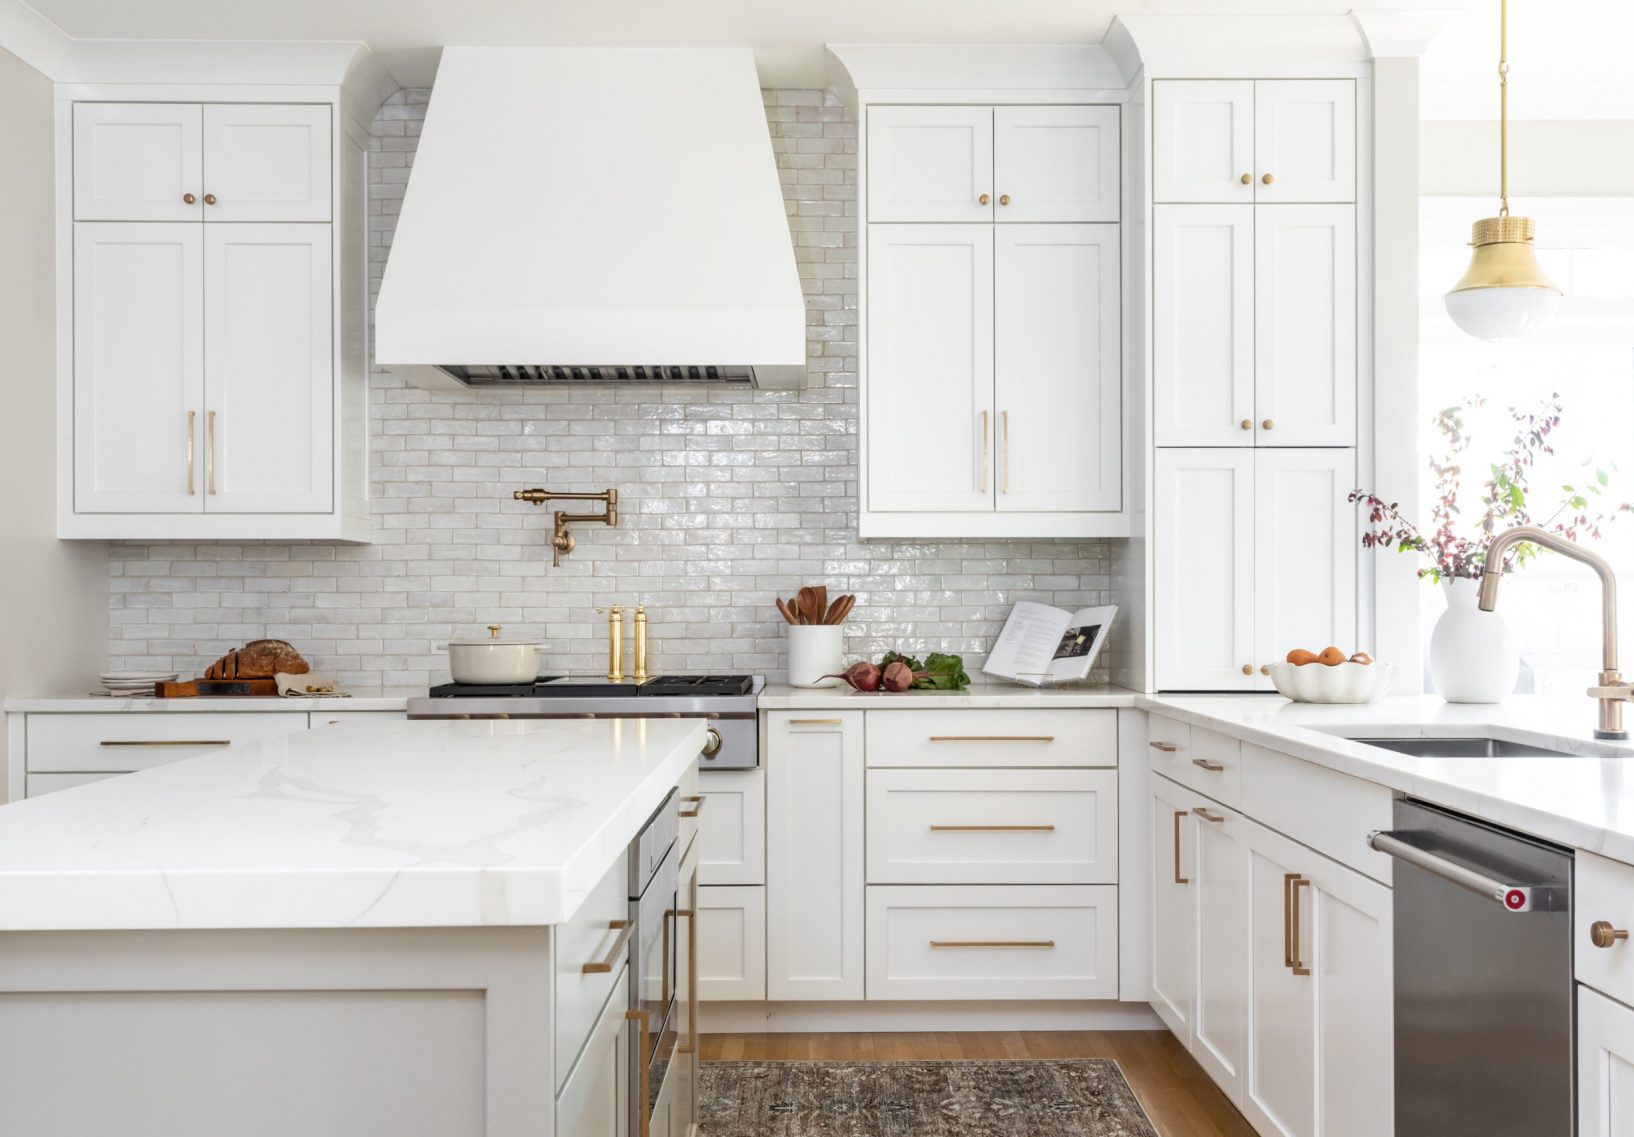 Modern white kitchen with gold hardware, white cabinets, and white hood.